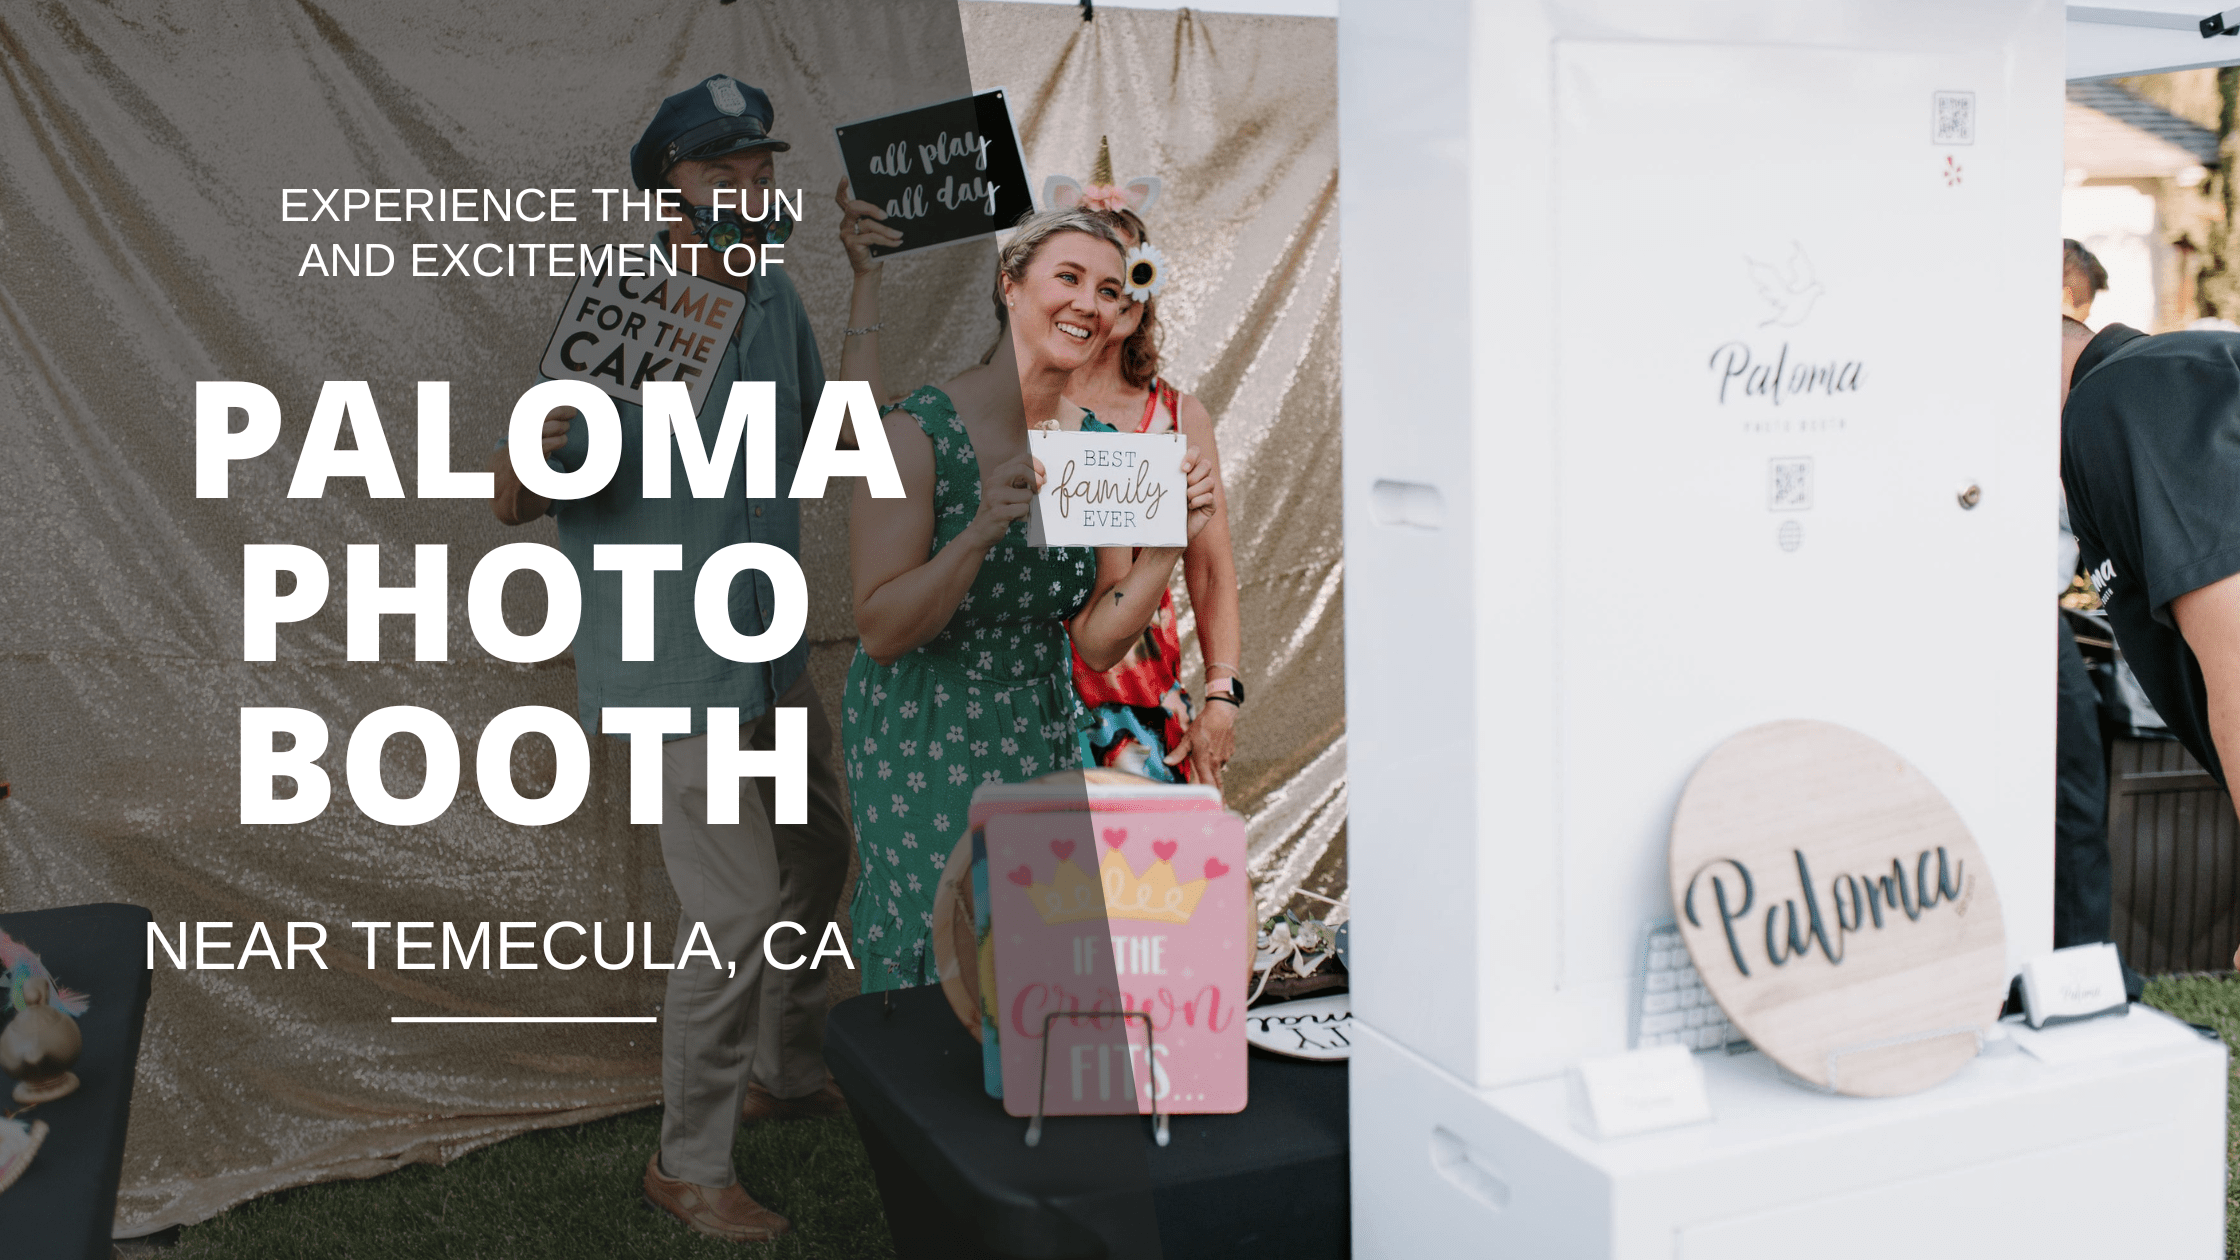 Paloma Photo Booth in Temecula, CA